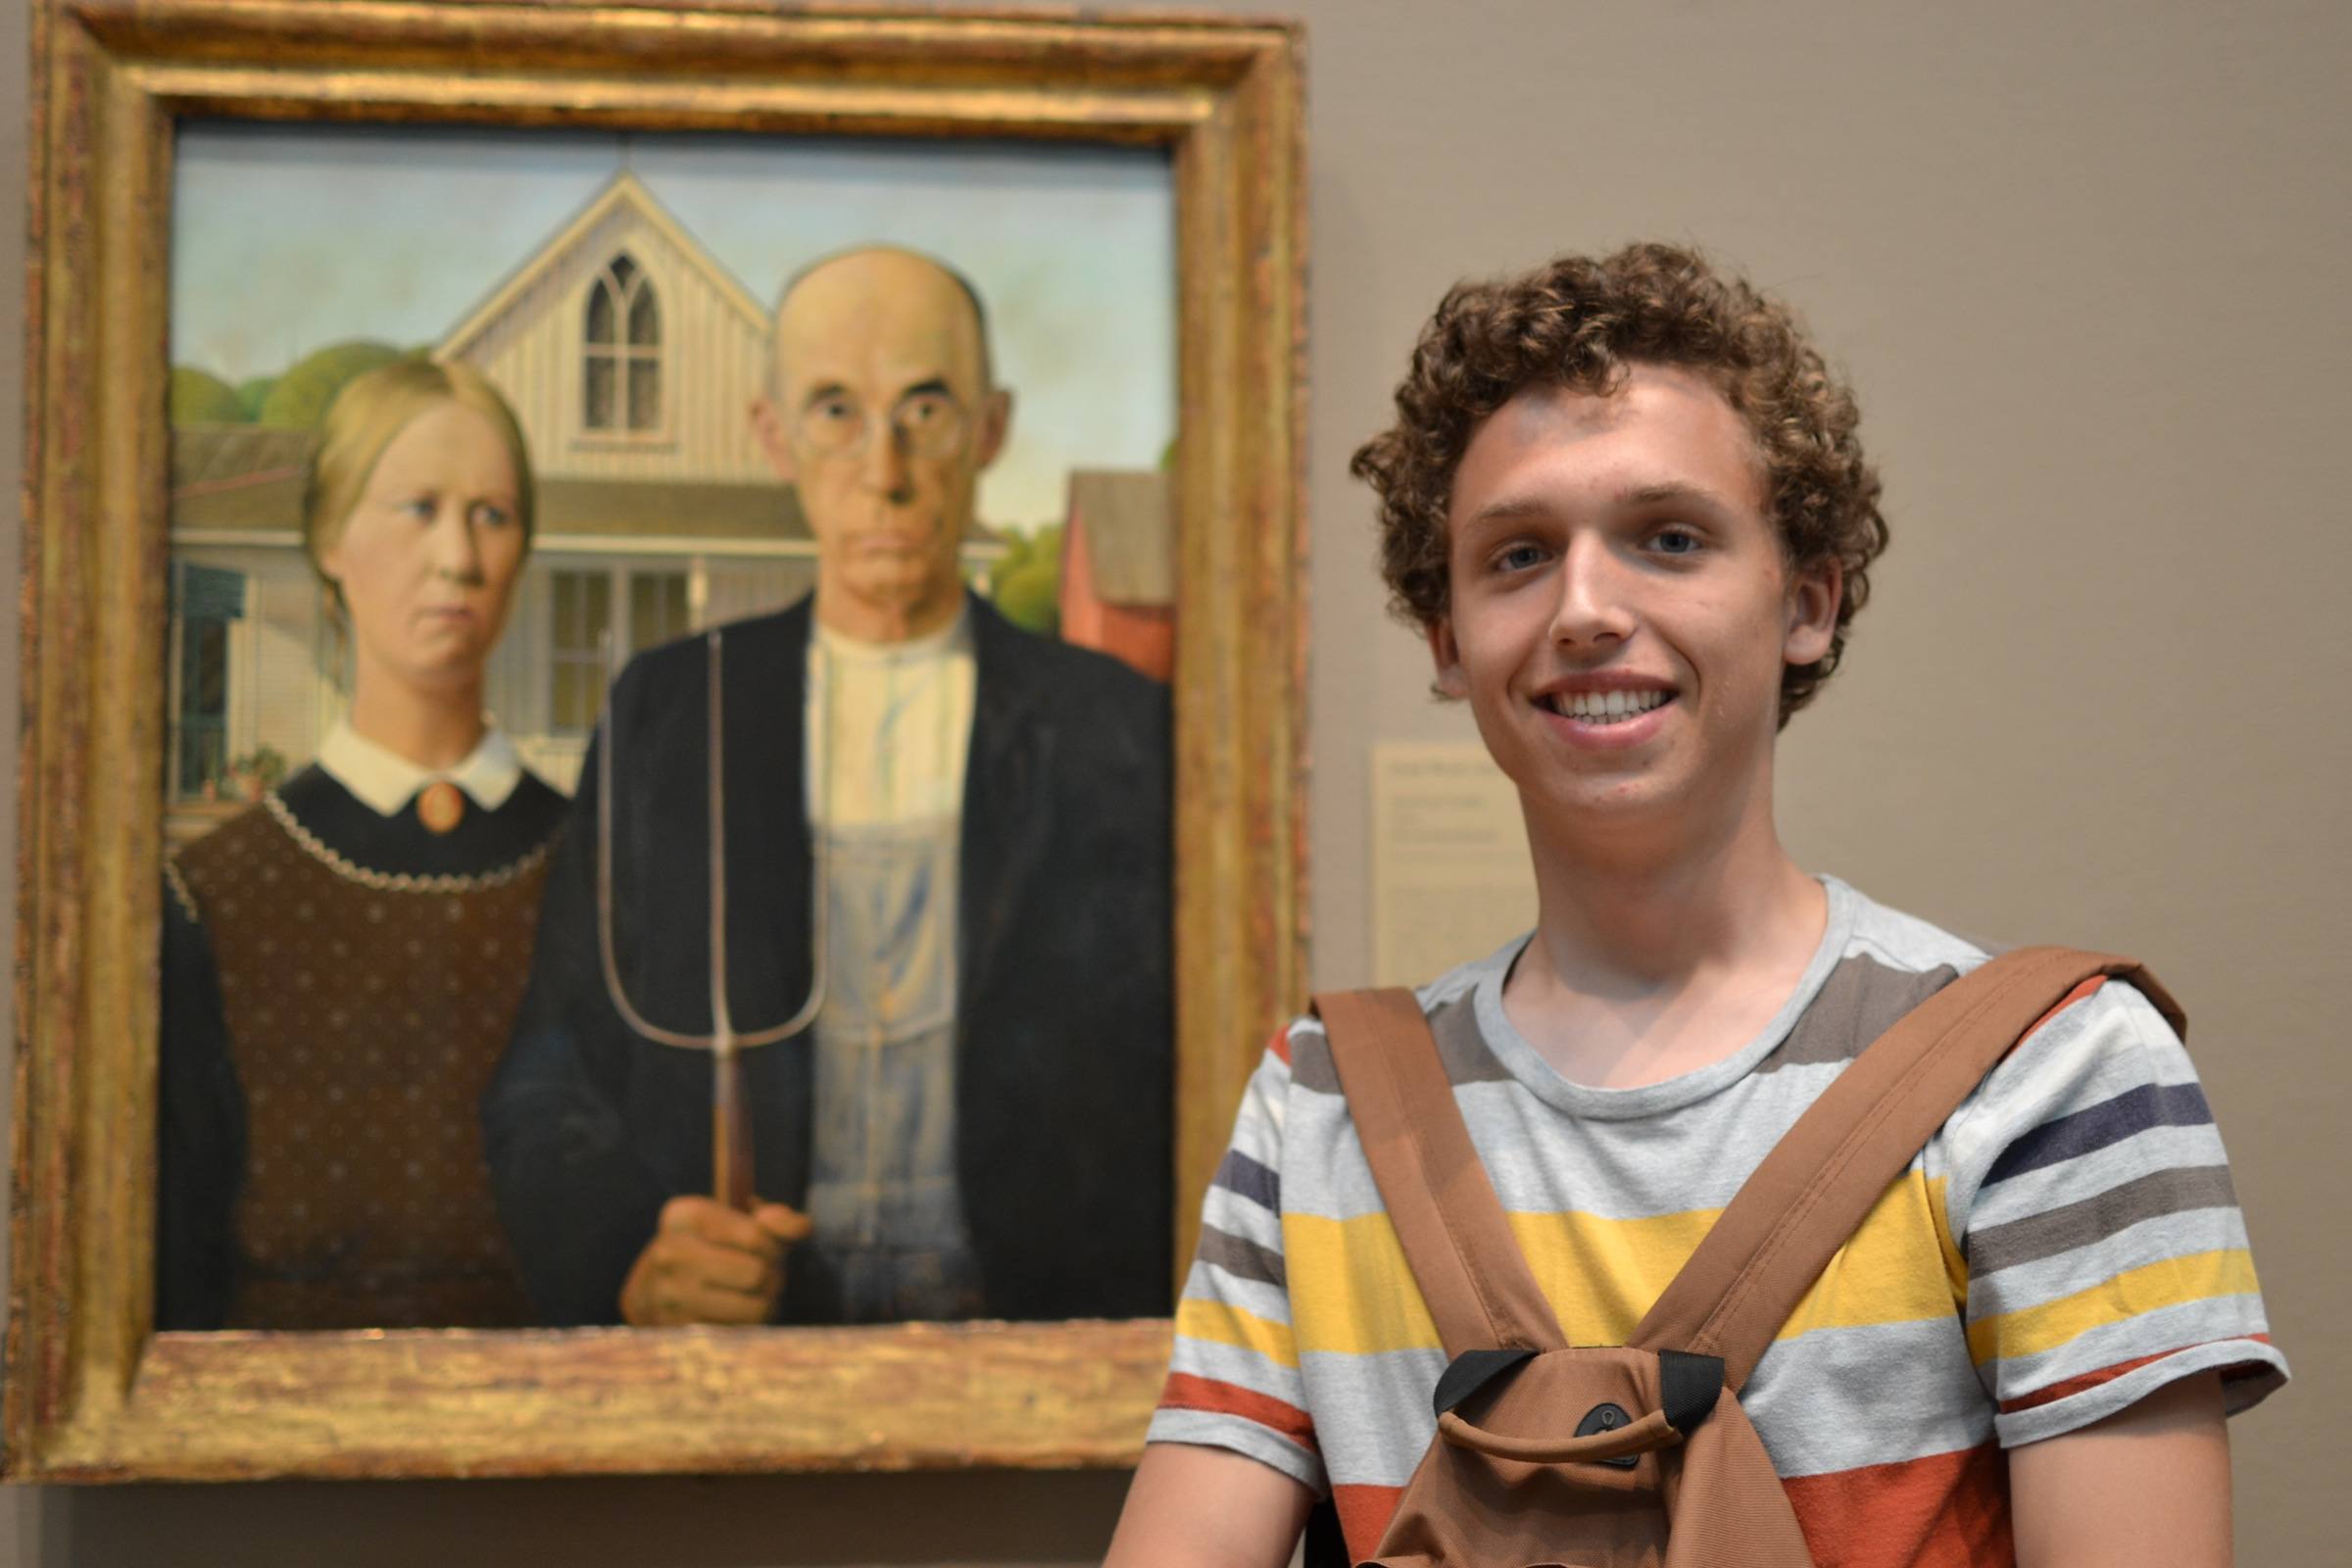 American Gothic. The security guard told me that I looked too happy for that photo